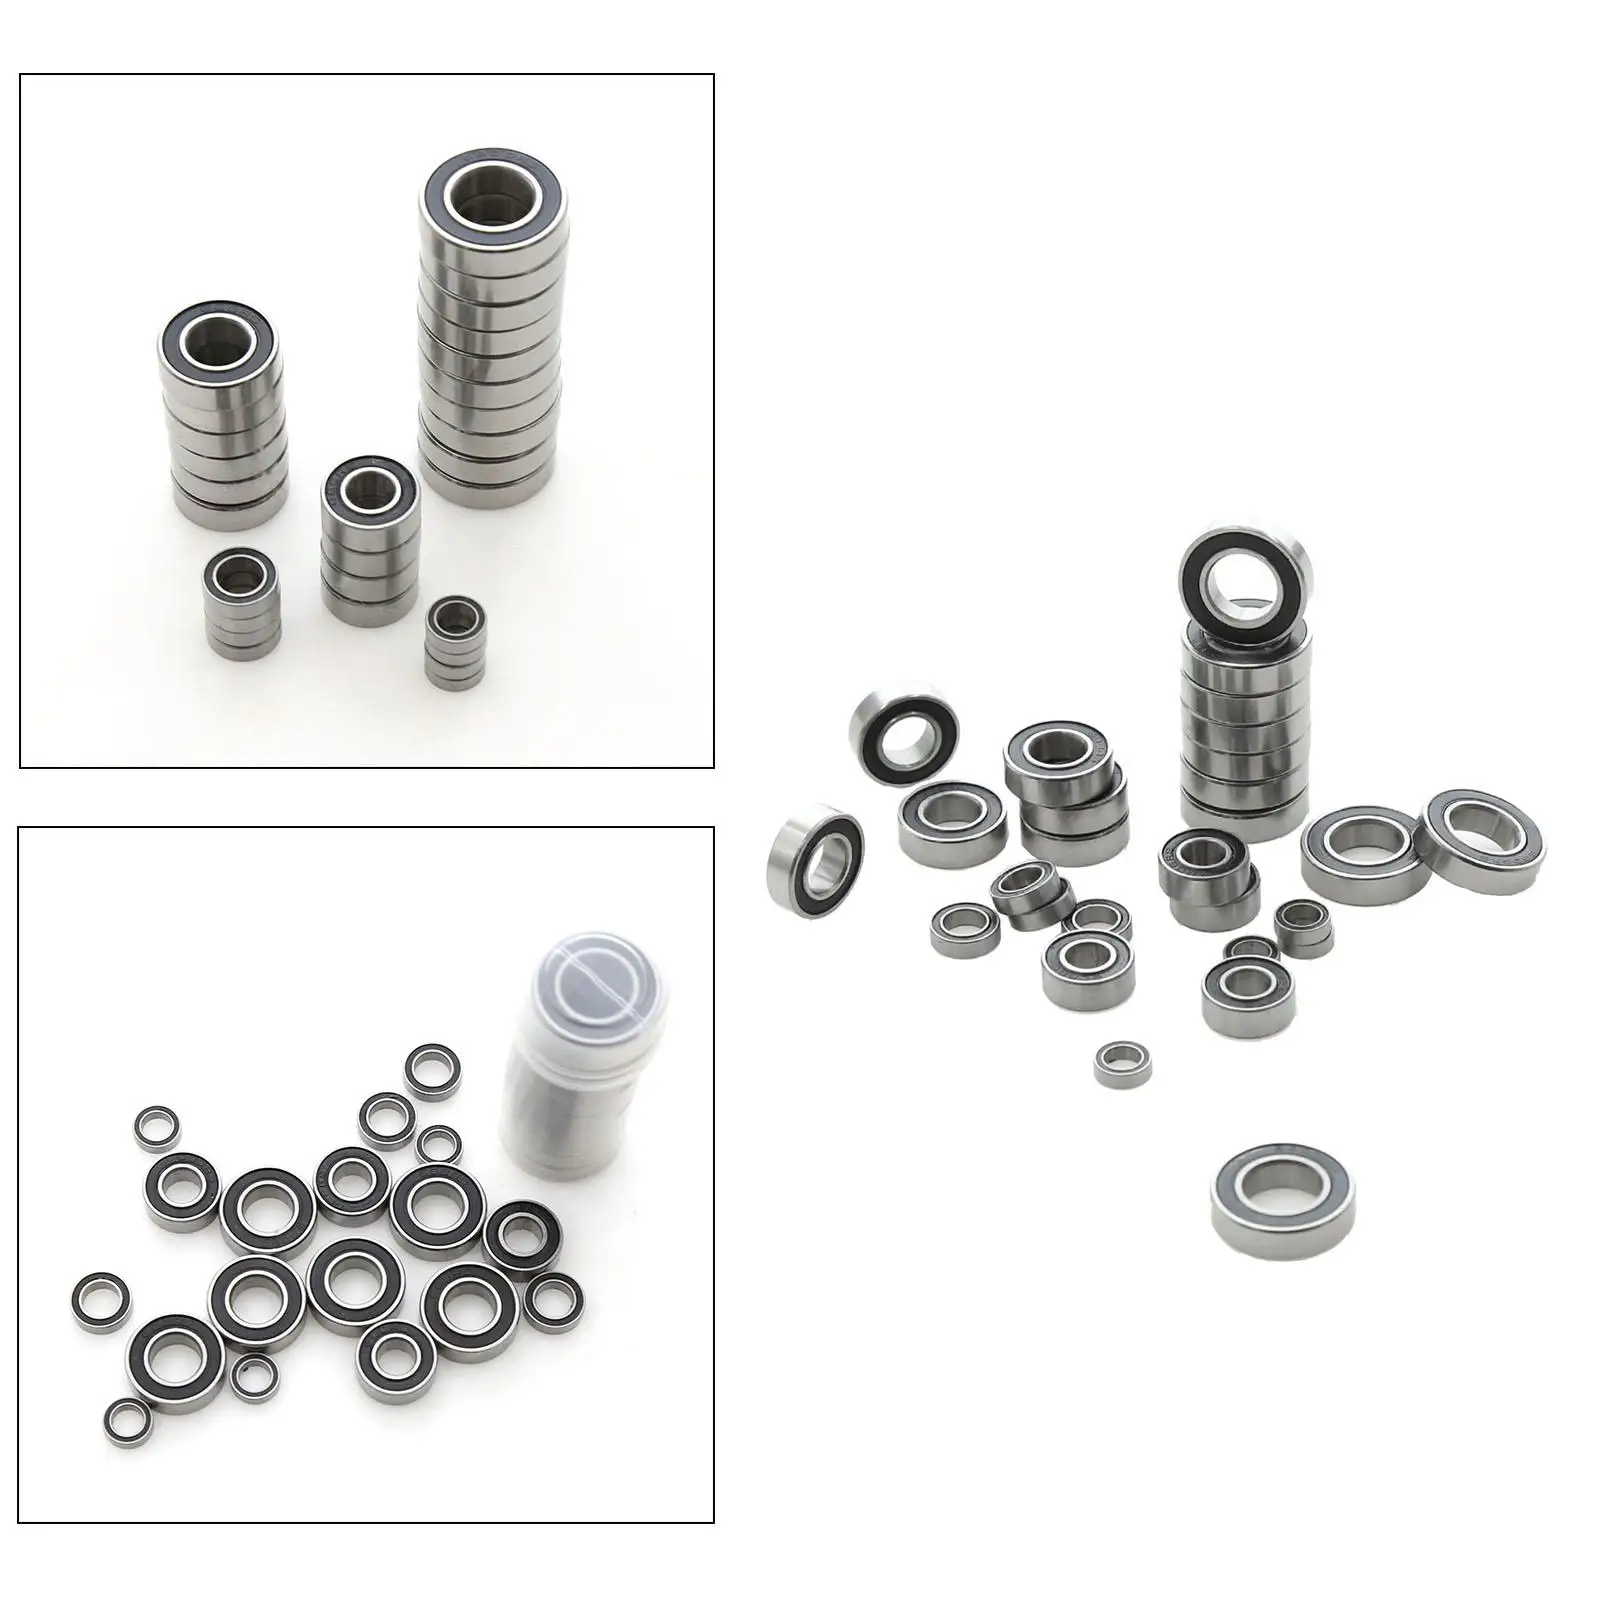 

28 Pieces Miniature Ball Bearings Kit Full Car Bearing Rubber Sealed for Sledge 1:8 4WD Hobby Electric RC Truggy Upgrades